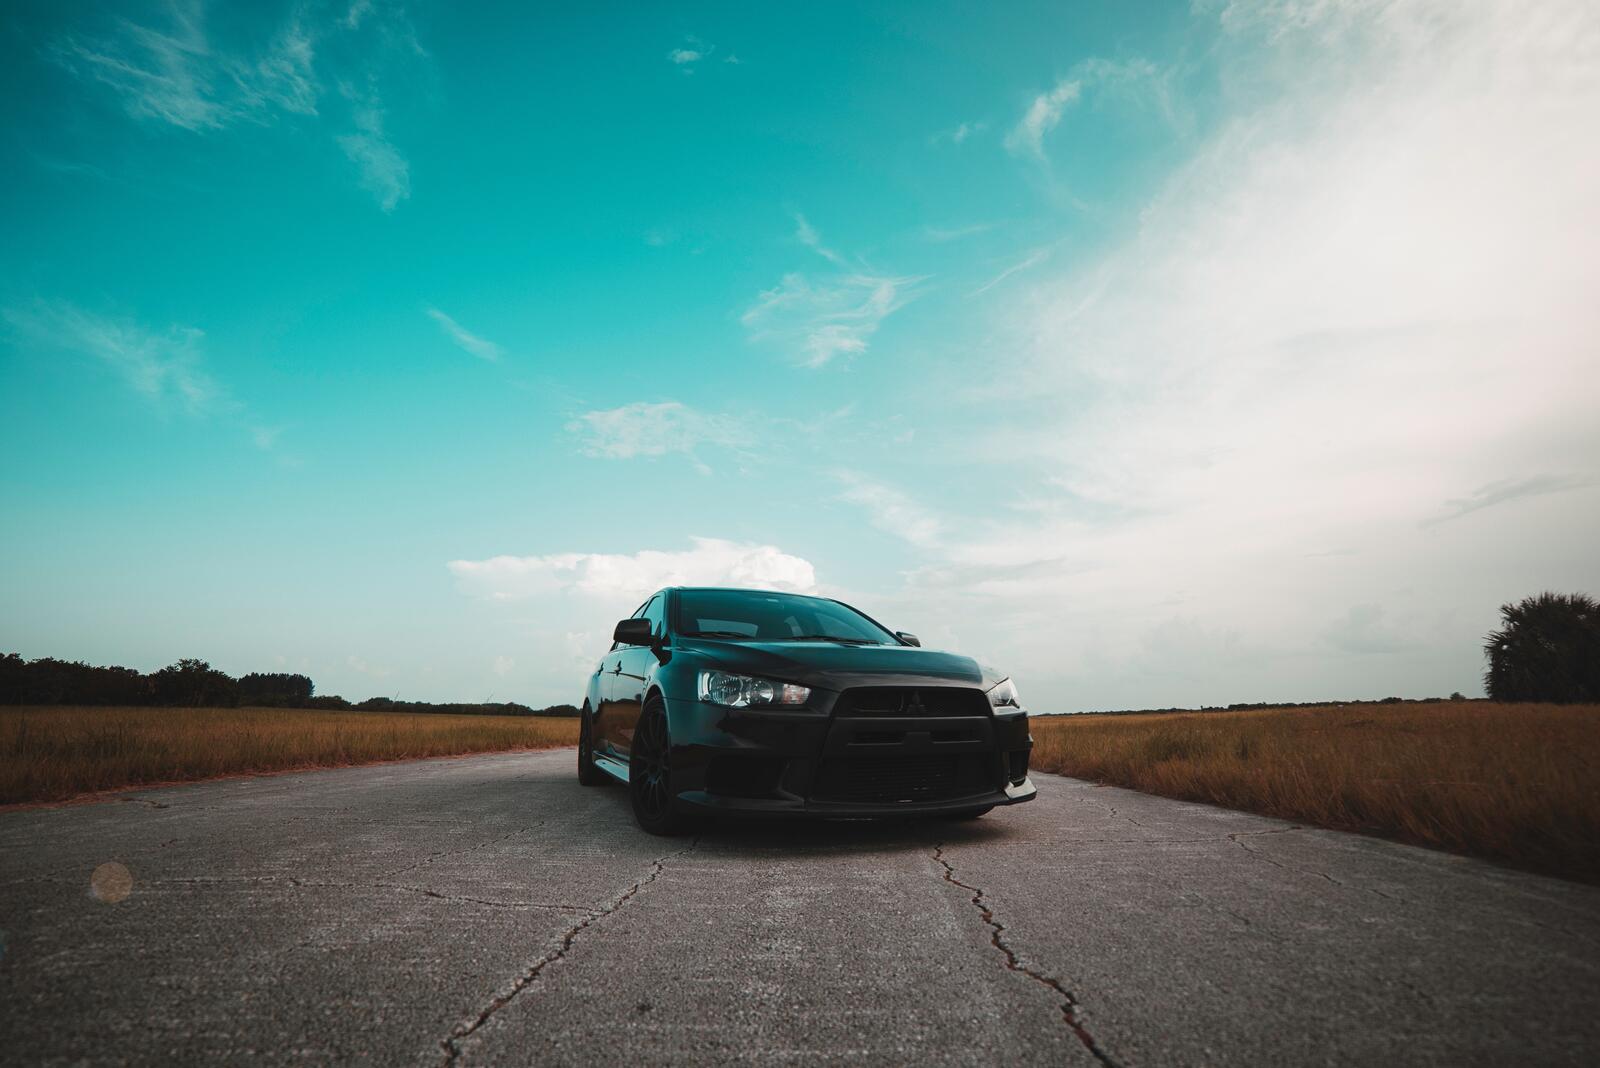 Free photo Black Mitsubishi Lancer on a country road in a field